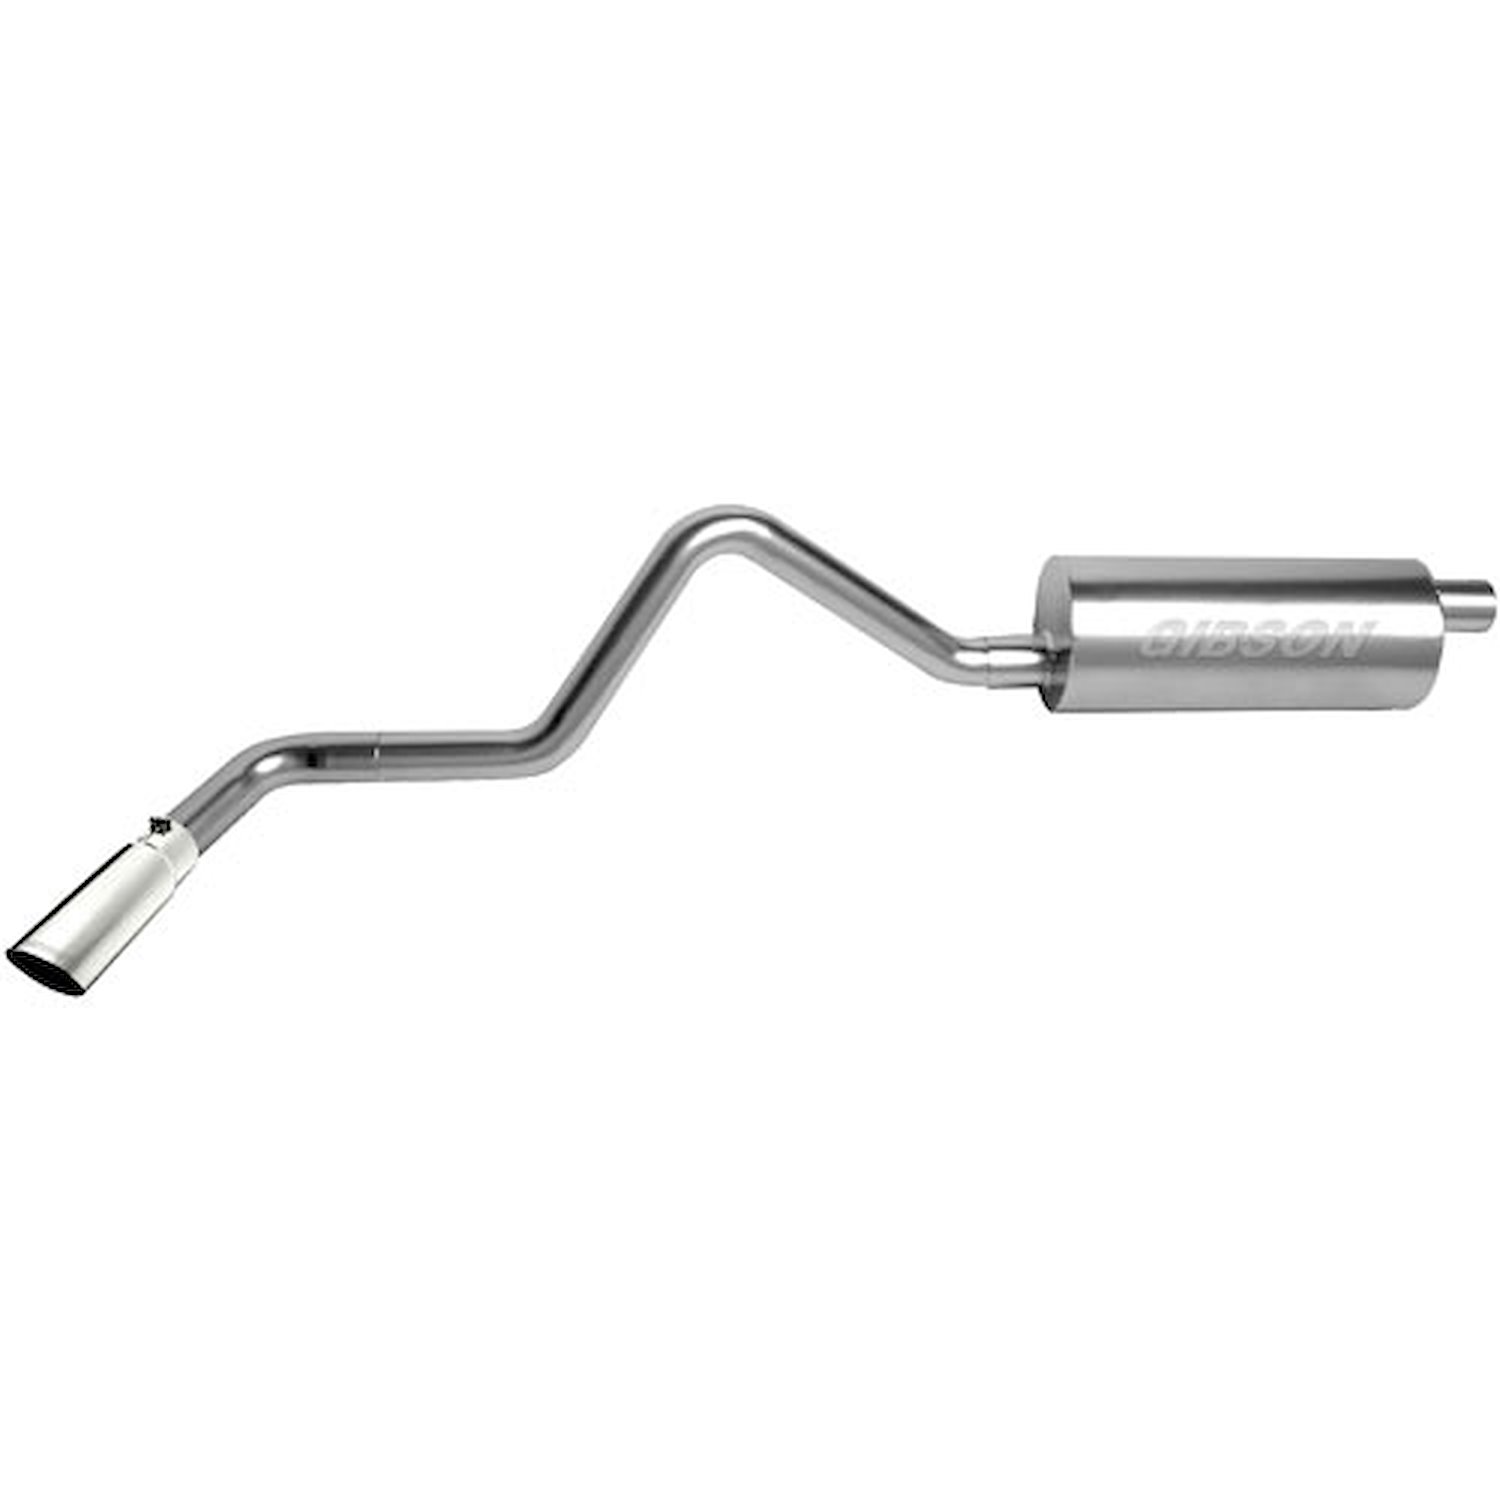 Swept-Side Cat-Back Exhaust 2007-14 Ford Expedition EL 5.4L 2WD/4WD